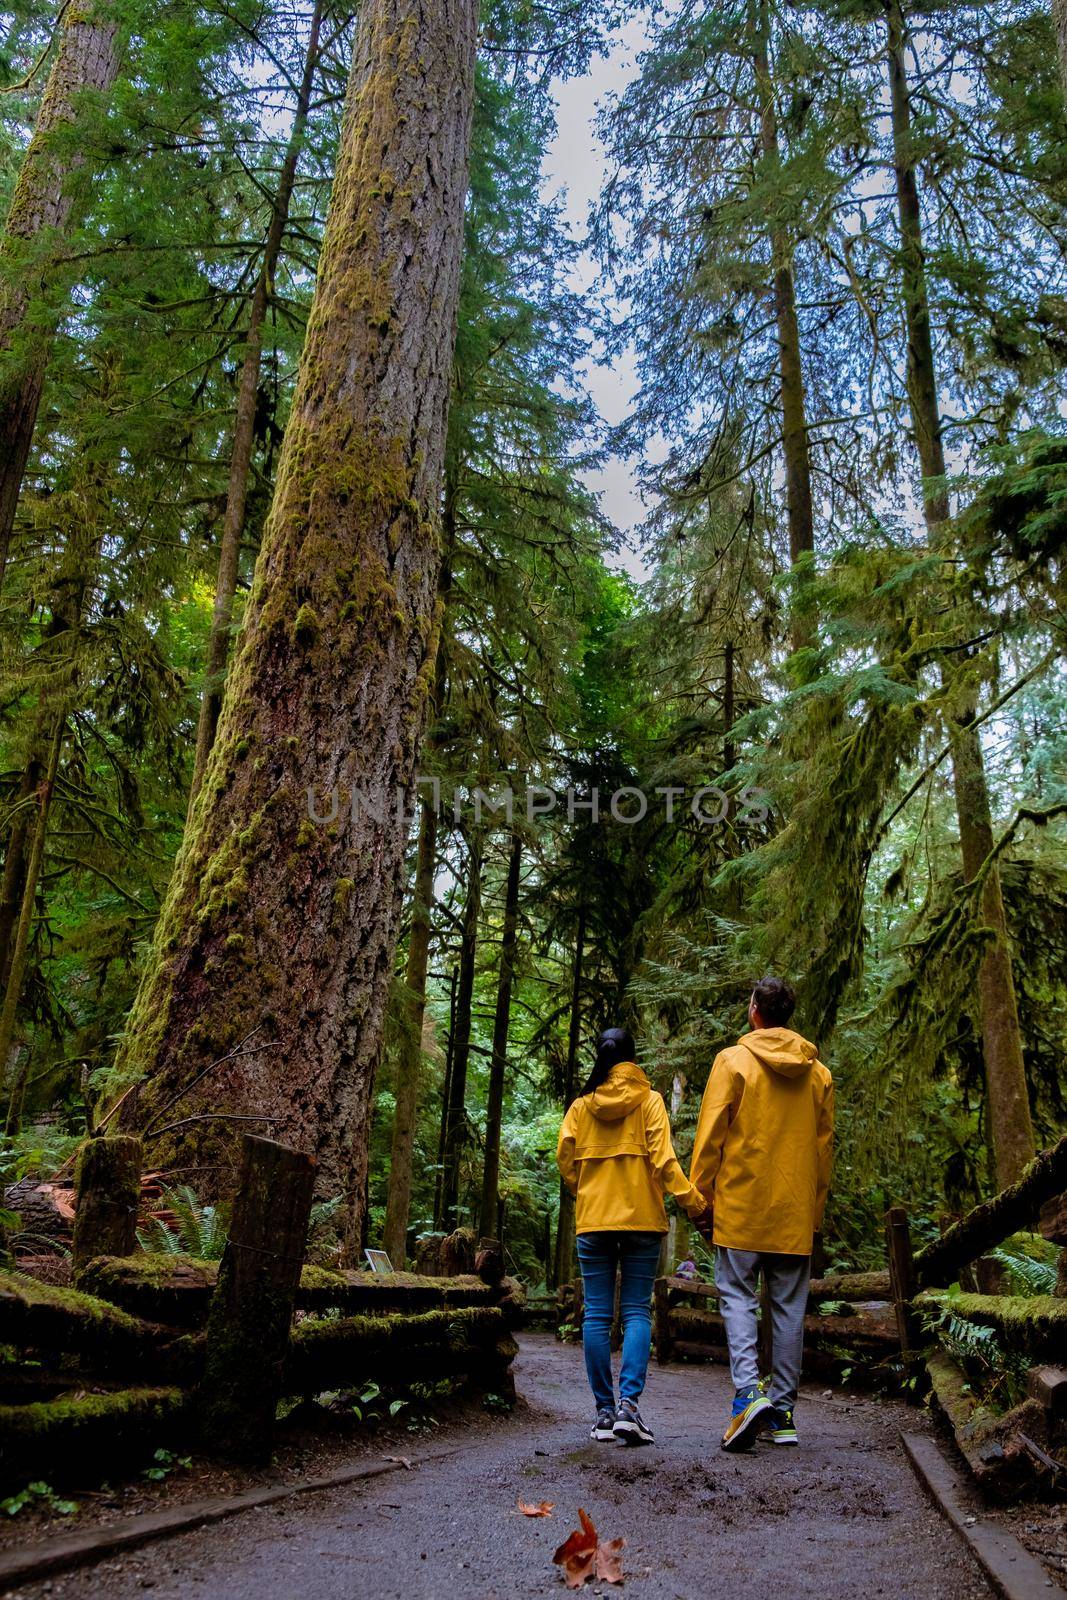 Vancouver Island, Canada, Cathedral Grove park Vancouver Island Canada forest with huge Douglas trees and people in a yellow rain jacket, raincoat. Vancouver Island, rainforest with huge woods